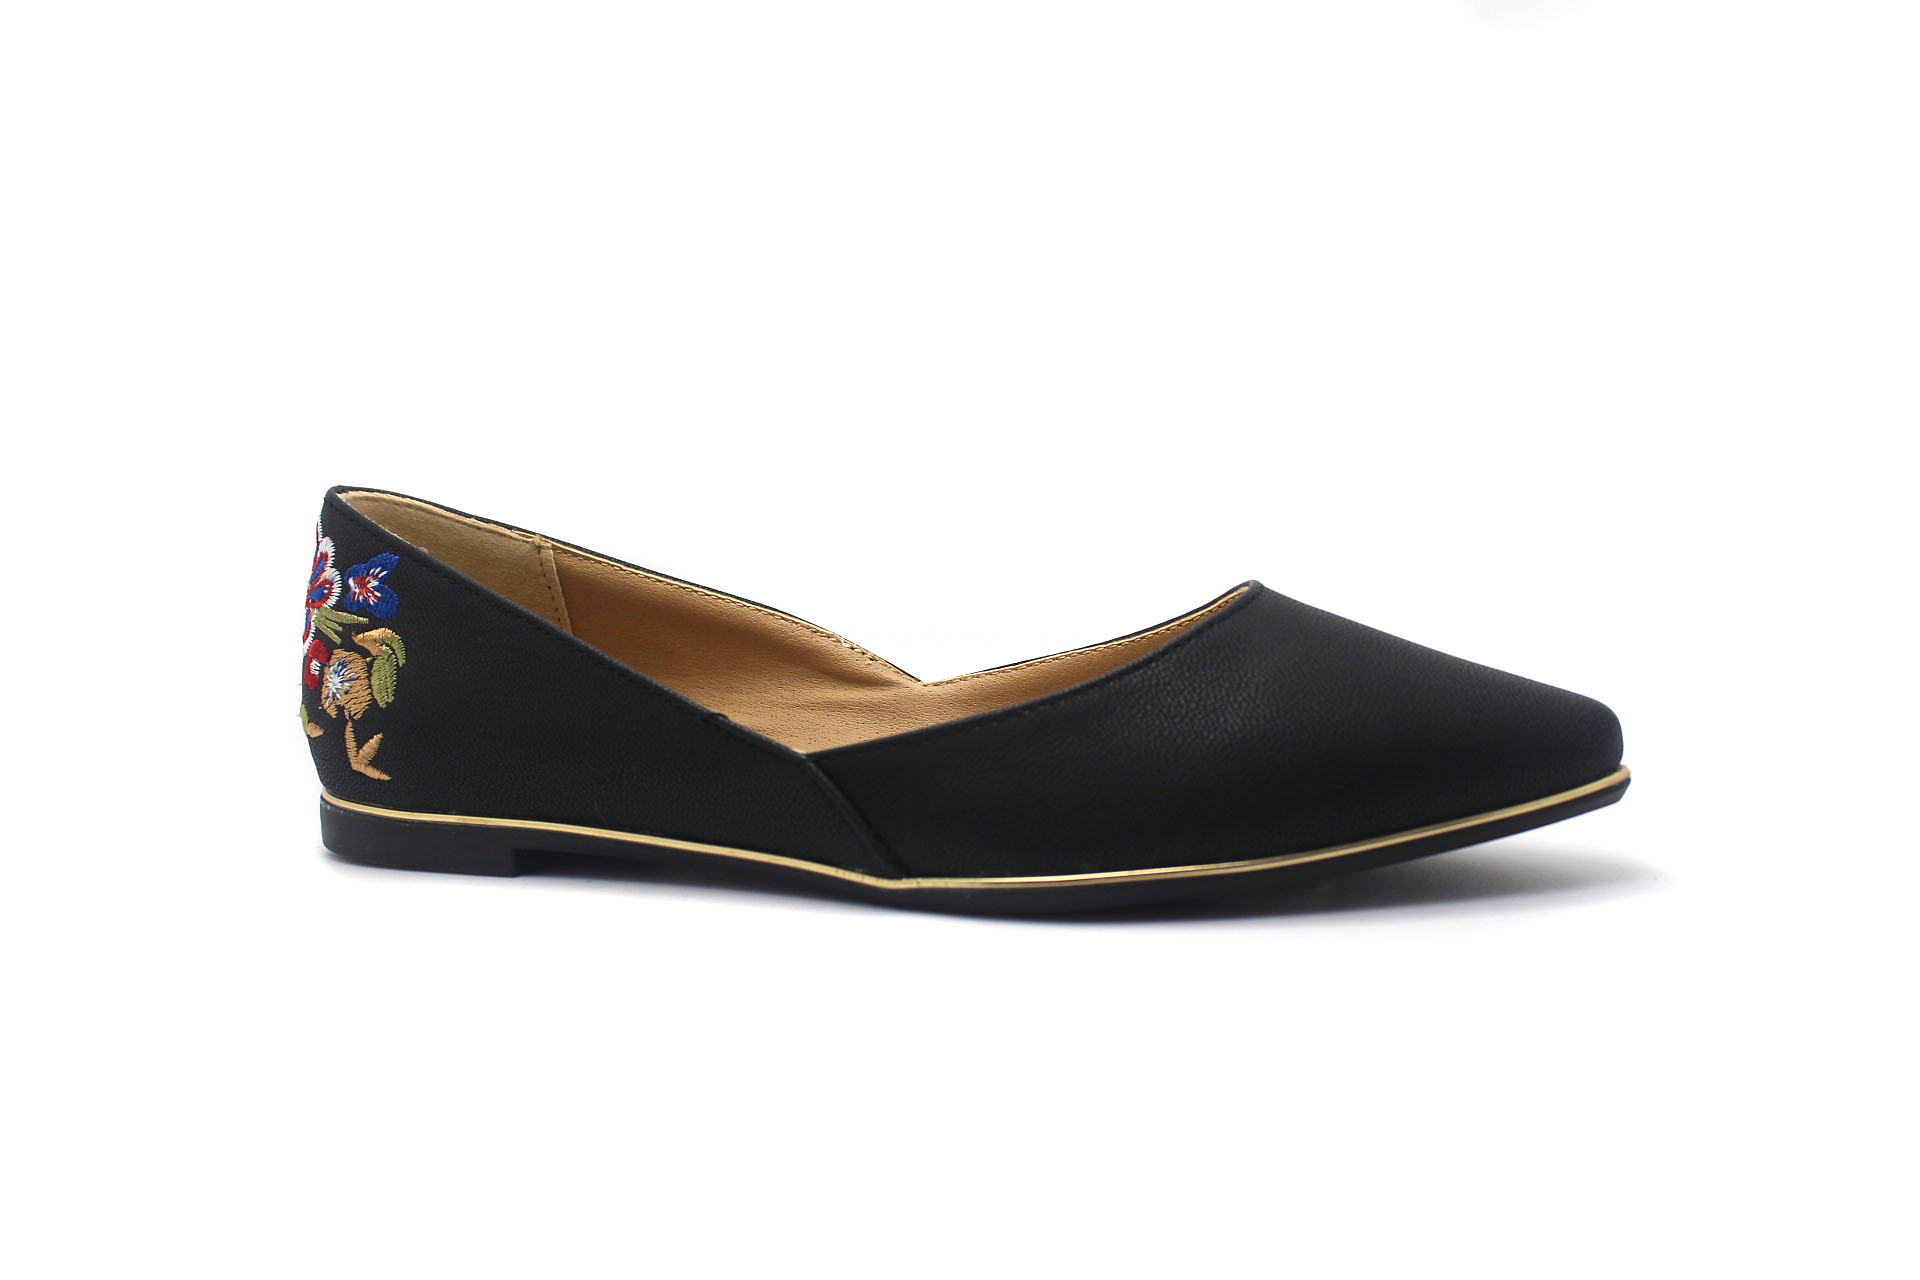 Poity toe flat shoes with embroidery elements